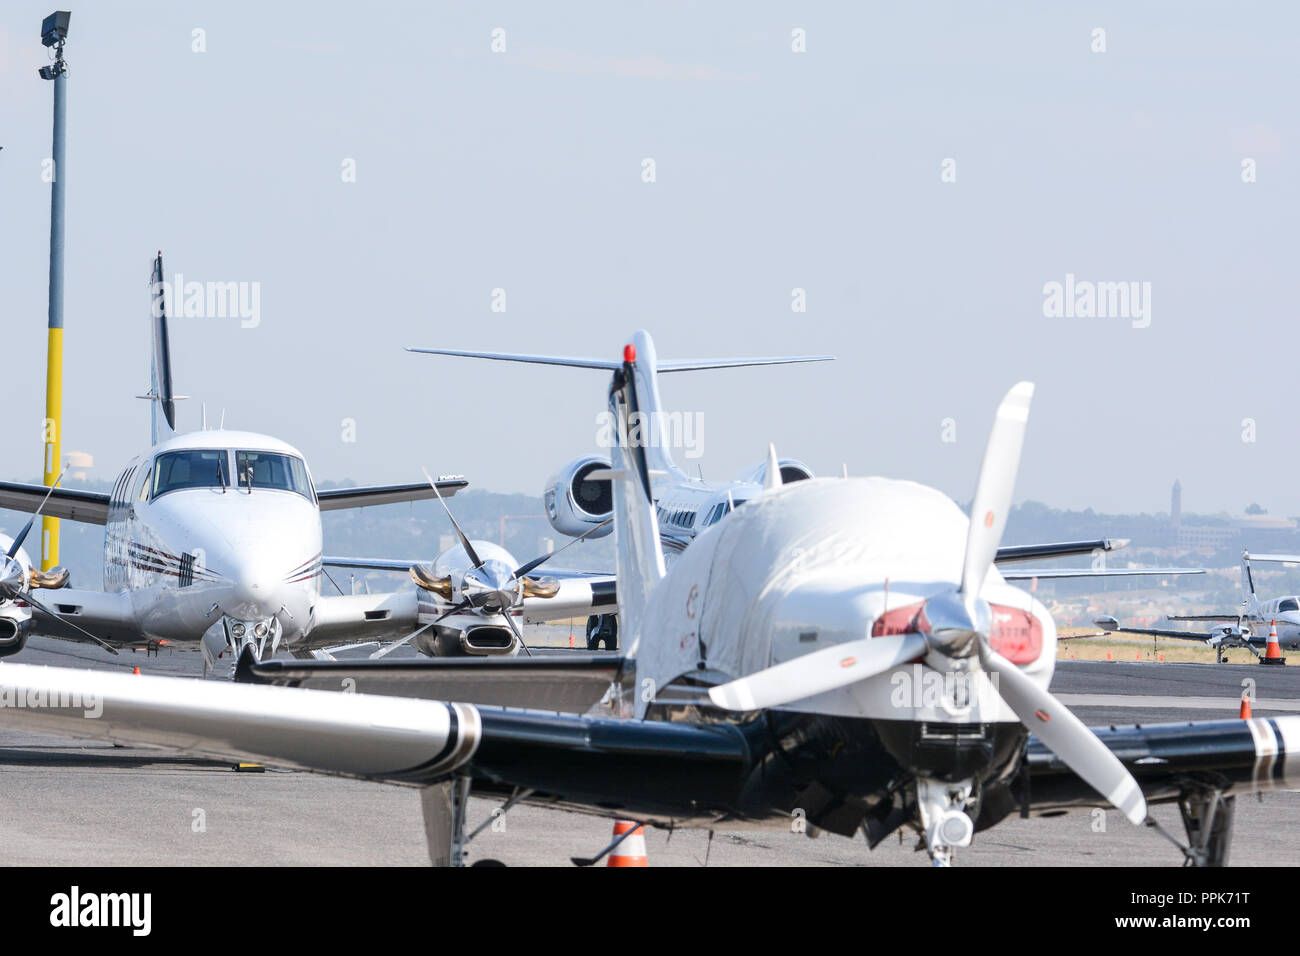 Luxury private jets lined up on the runway Stock Photo